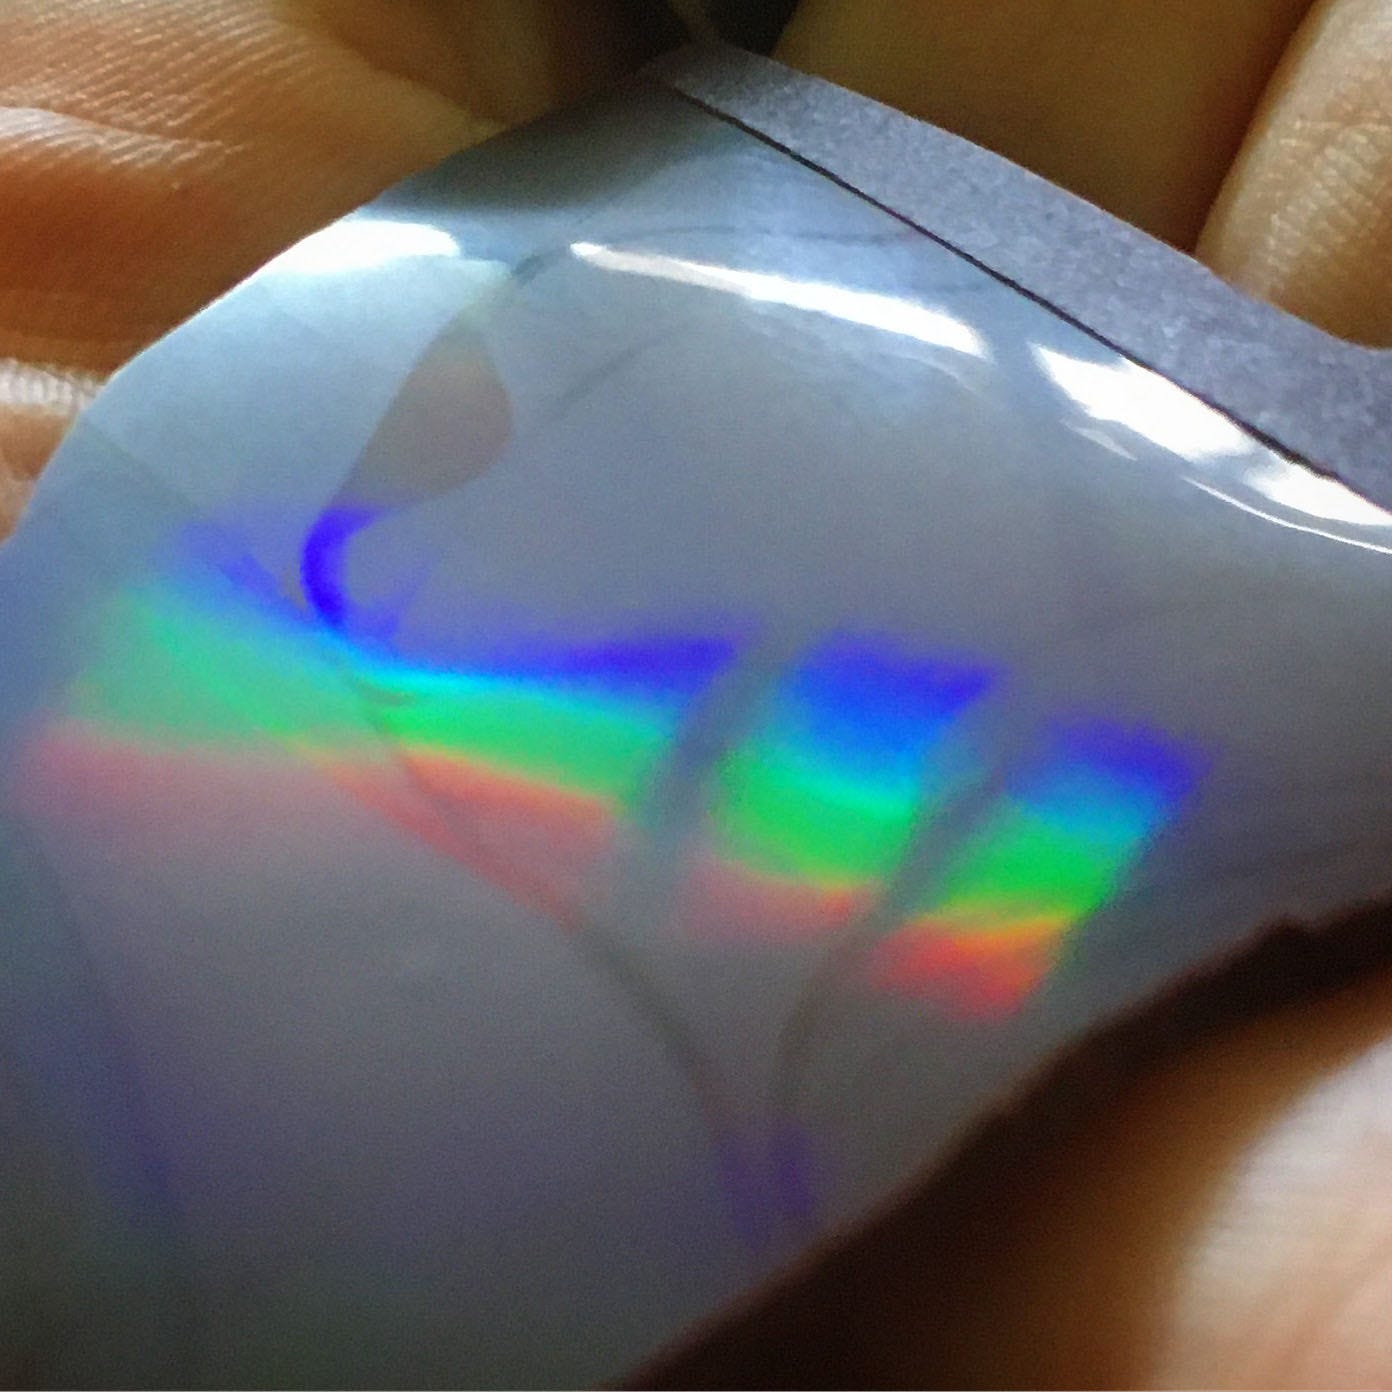 rainbow on chocolate from diffraction grating sheet